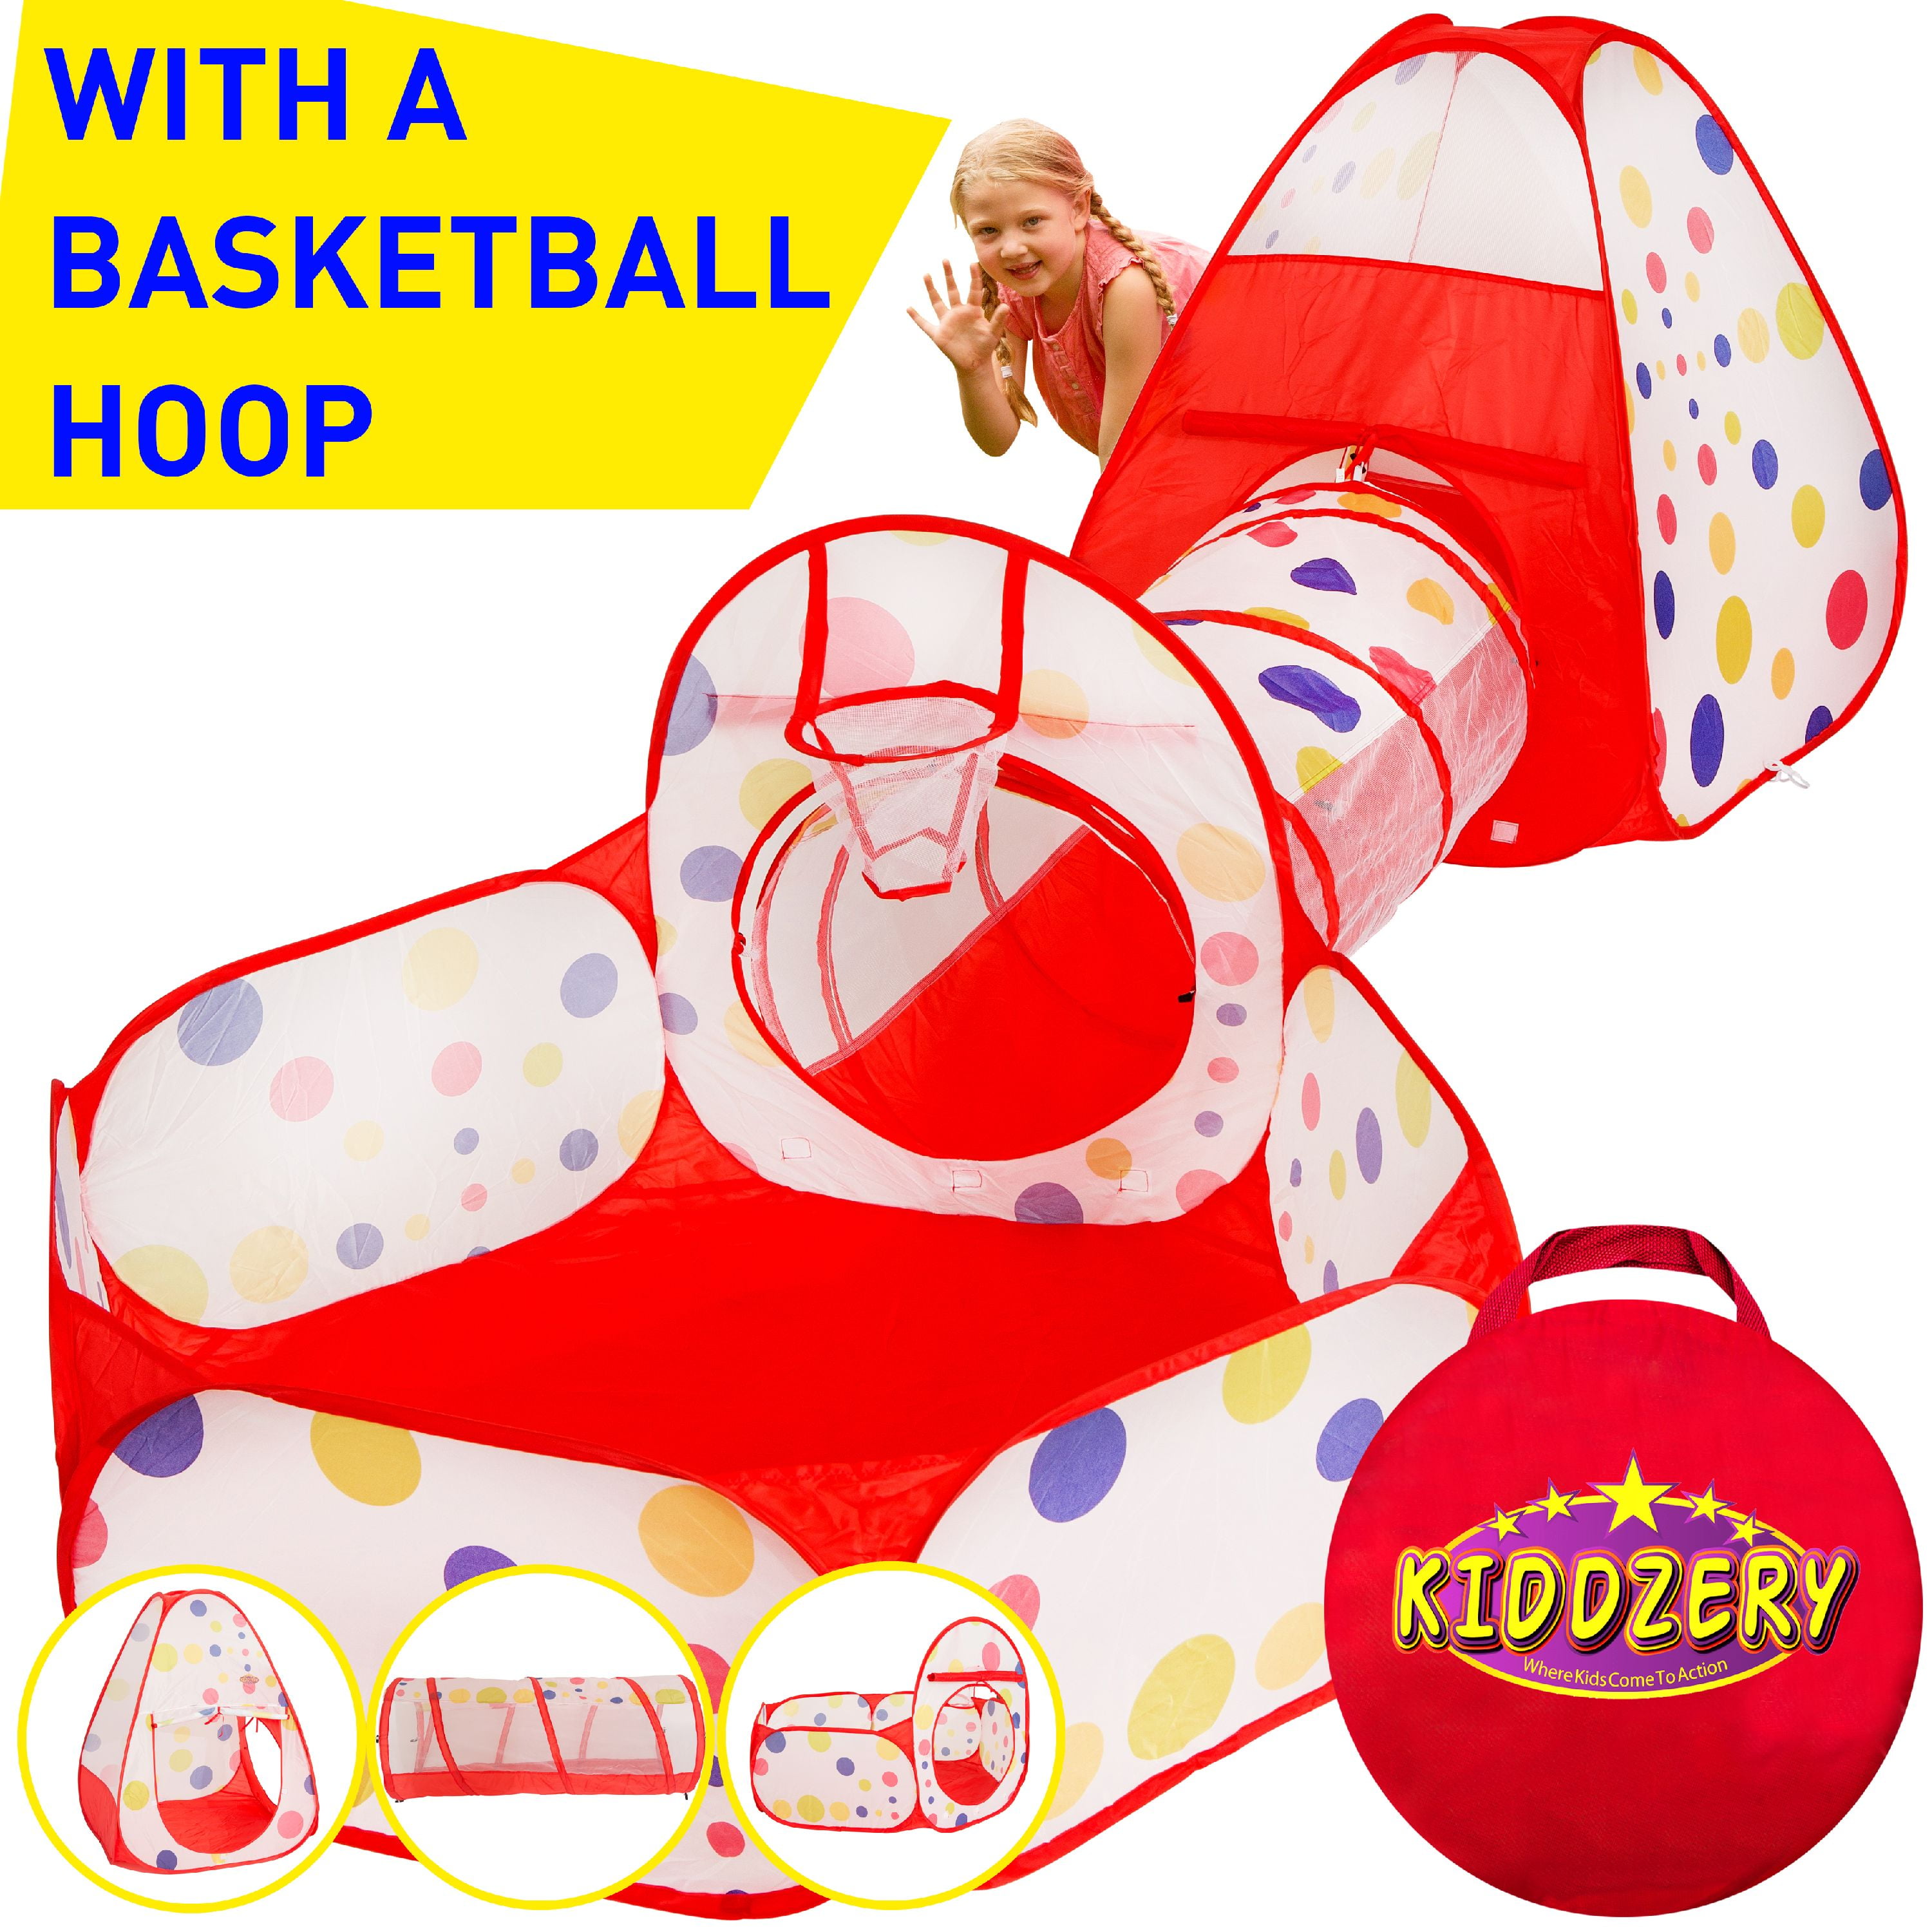 Balls Not Included WASDY 3 in 1 Kids Play Tent Crawl Tunnel Ball Pit with Ball Hoop Ocean Cartoon Pop Up Playhouse Tent Indoor Outdoor Use Kids Toys Gifts for Children Baby Girls Boys